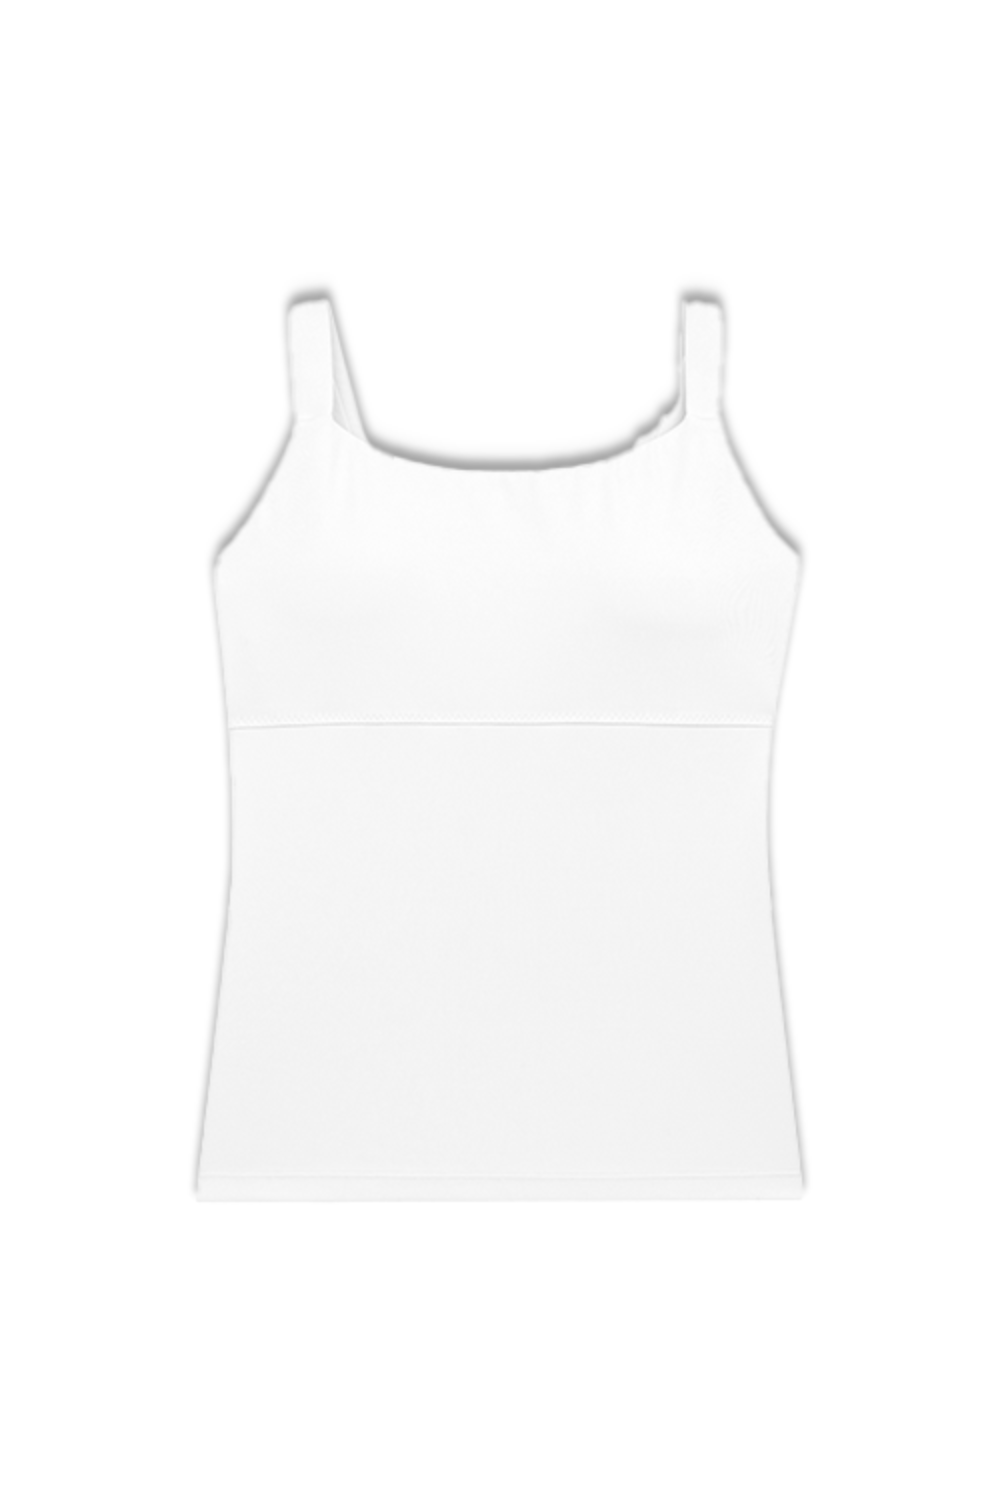 Be-free All Day Tank Top